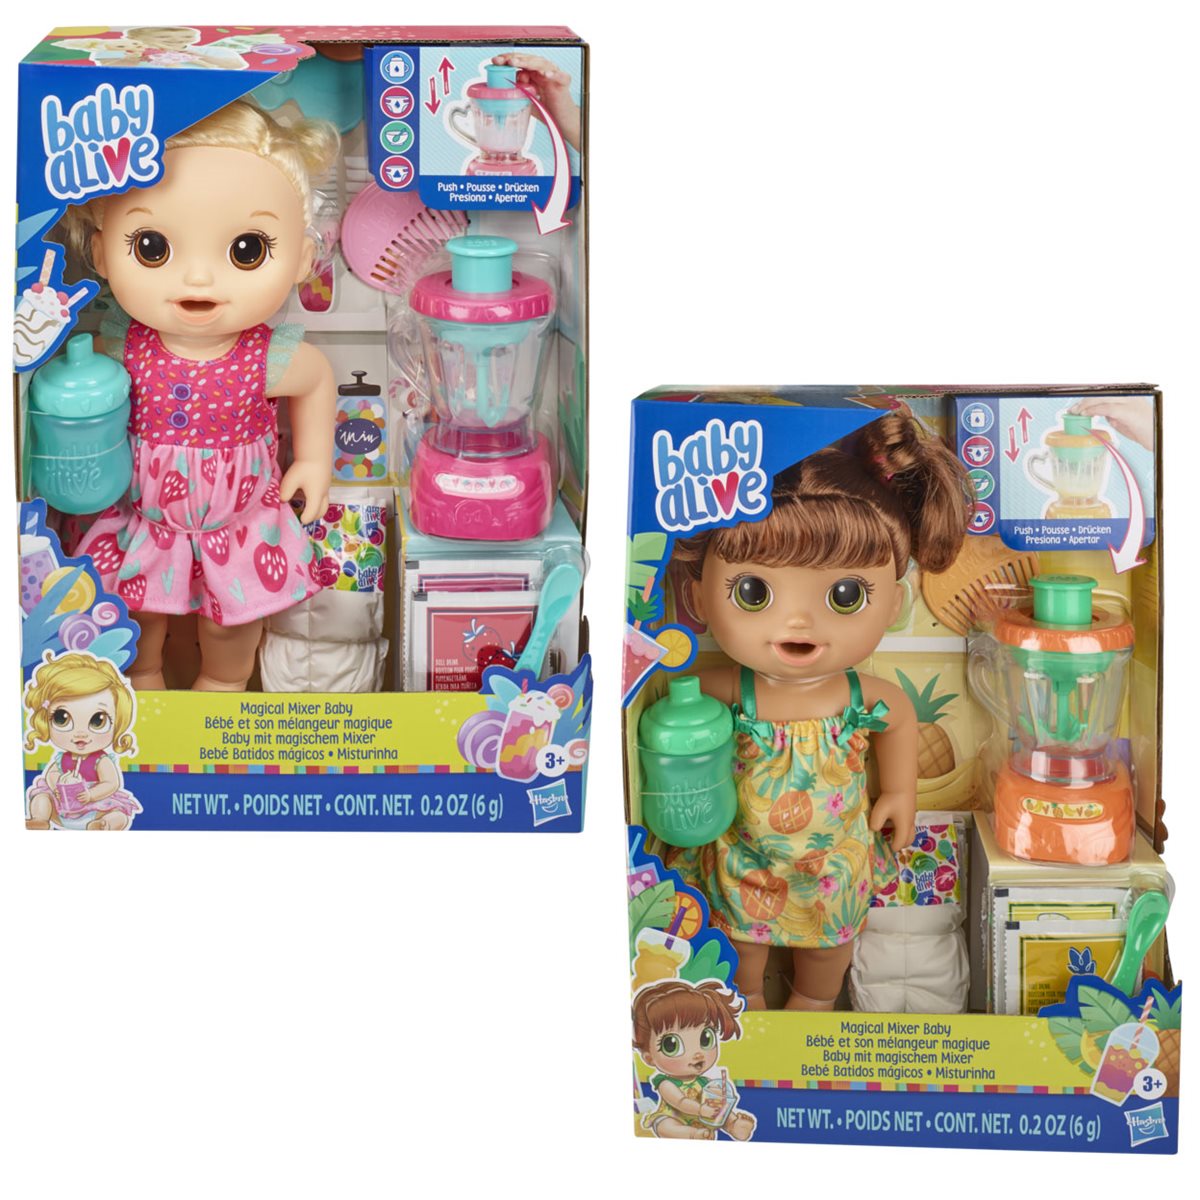 names for baby alive dolls